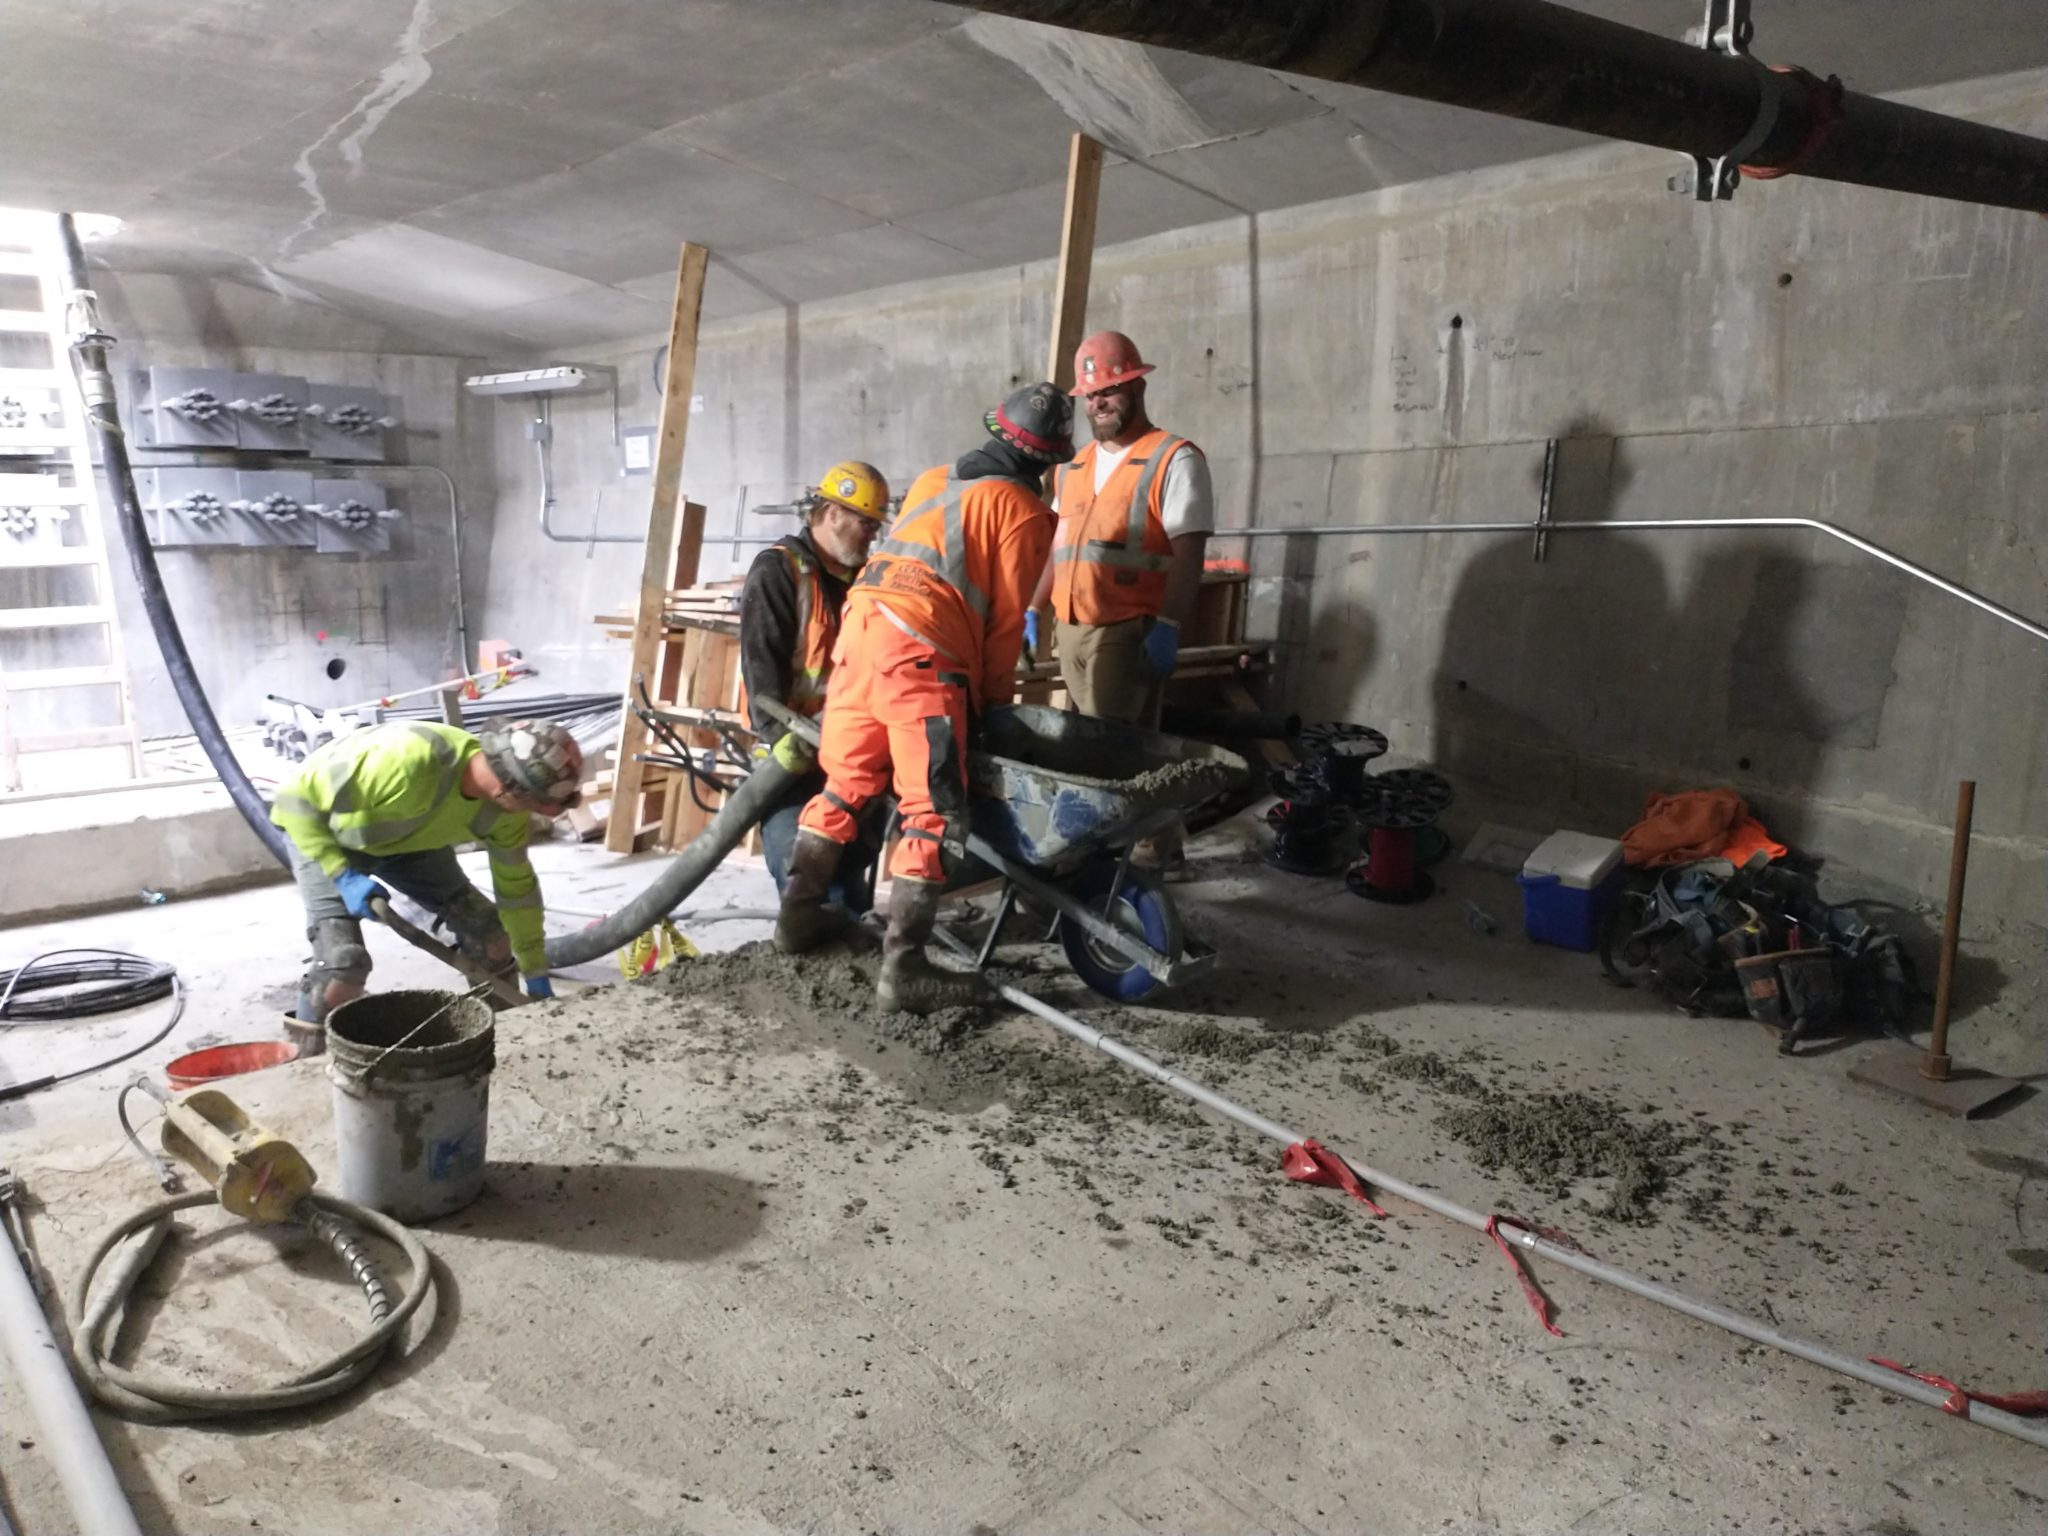 Structural concrete work taking place inside the West Seattle Bridge.